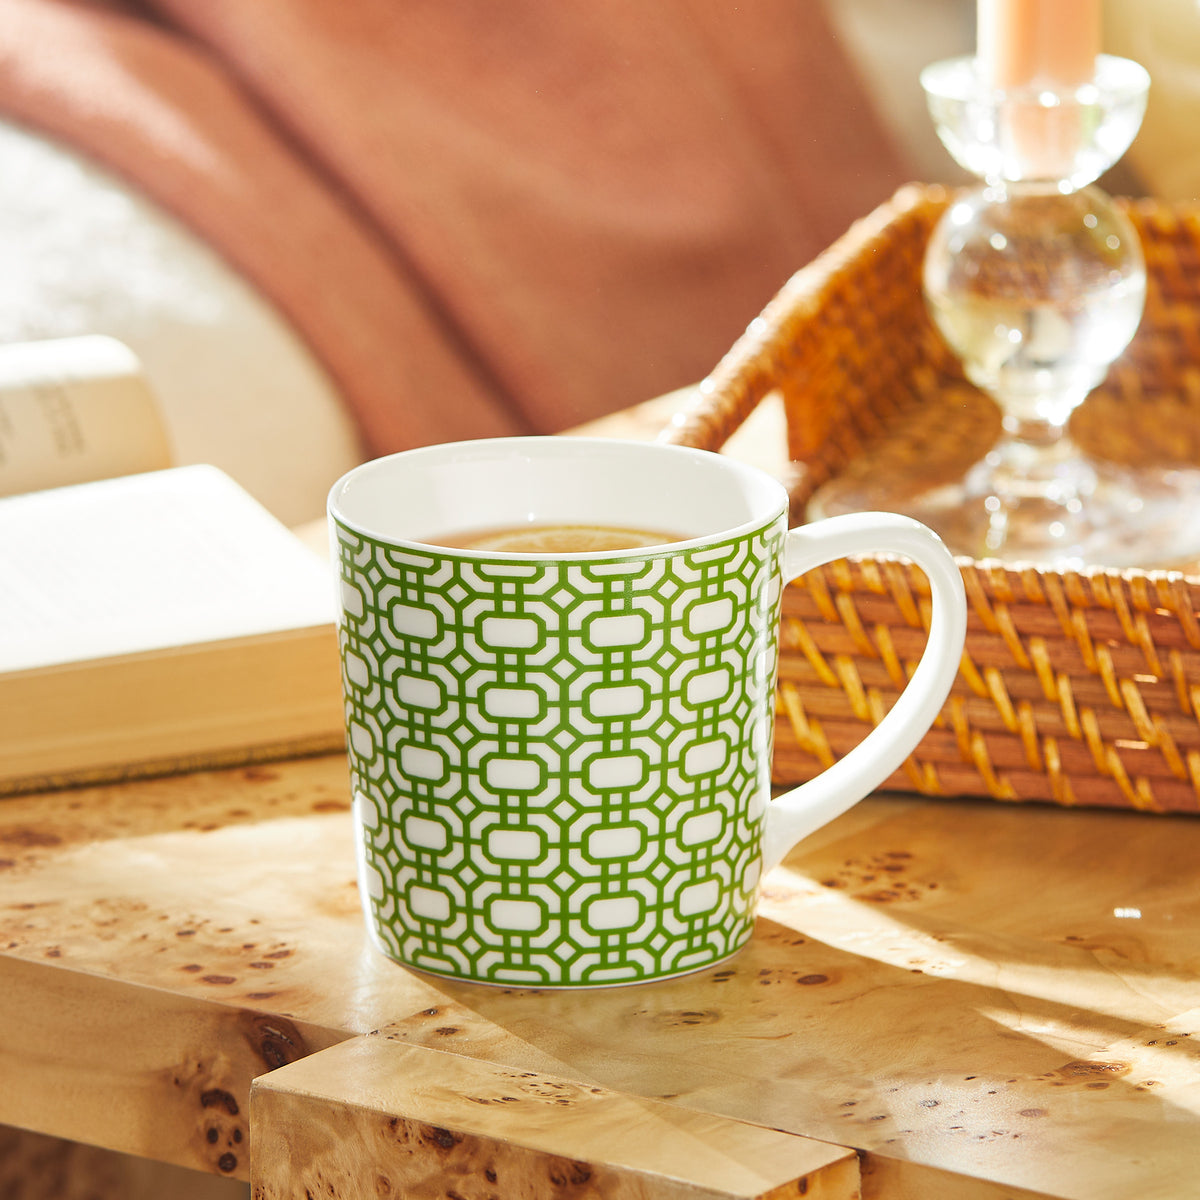 A Caskata Artisanal Home Newport Garden Gate Verde Mug filled with a hot beverage rests on a wooden table beside an open book and a woven basket containing a lit candle.